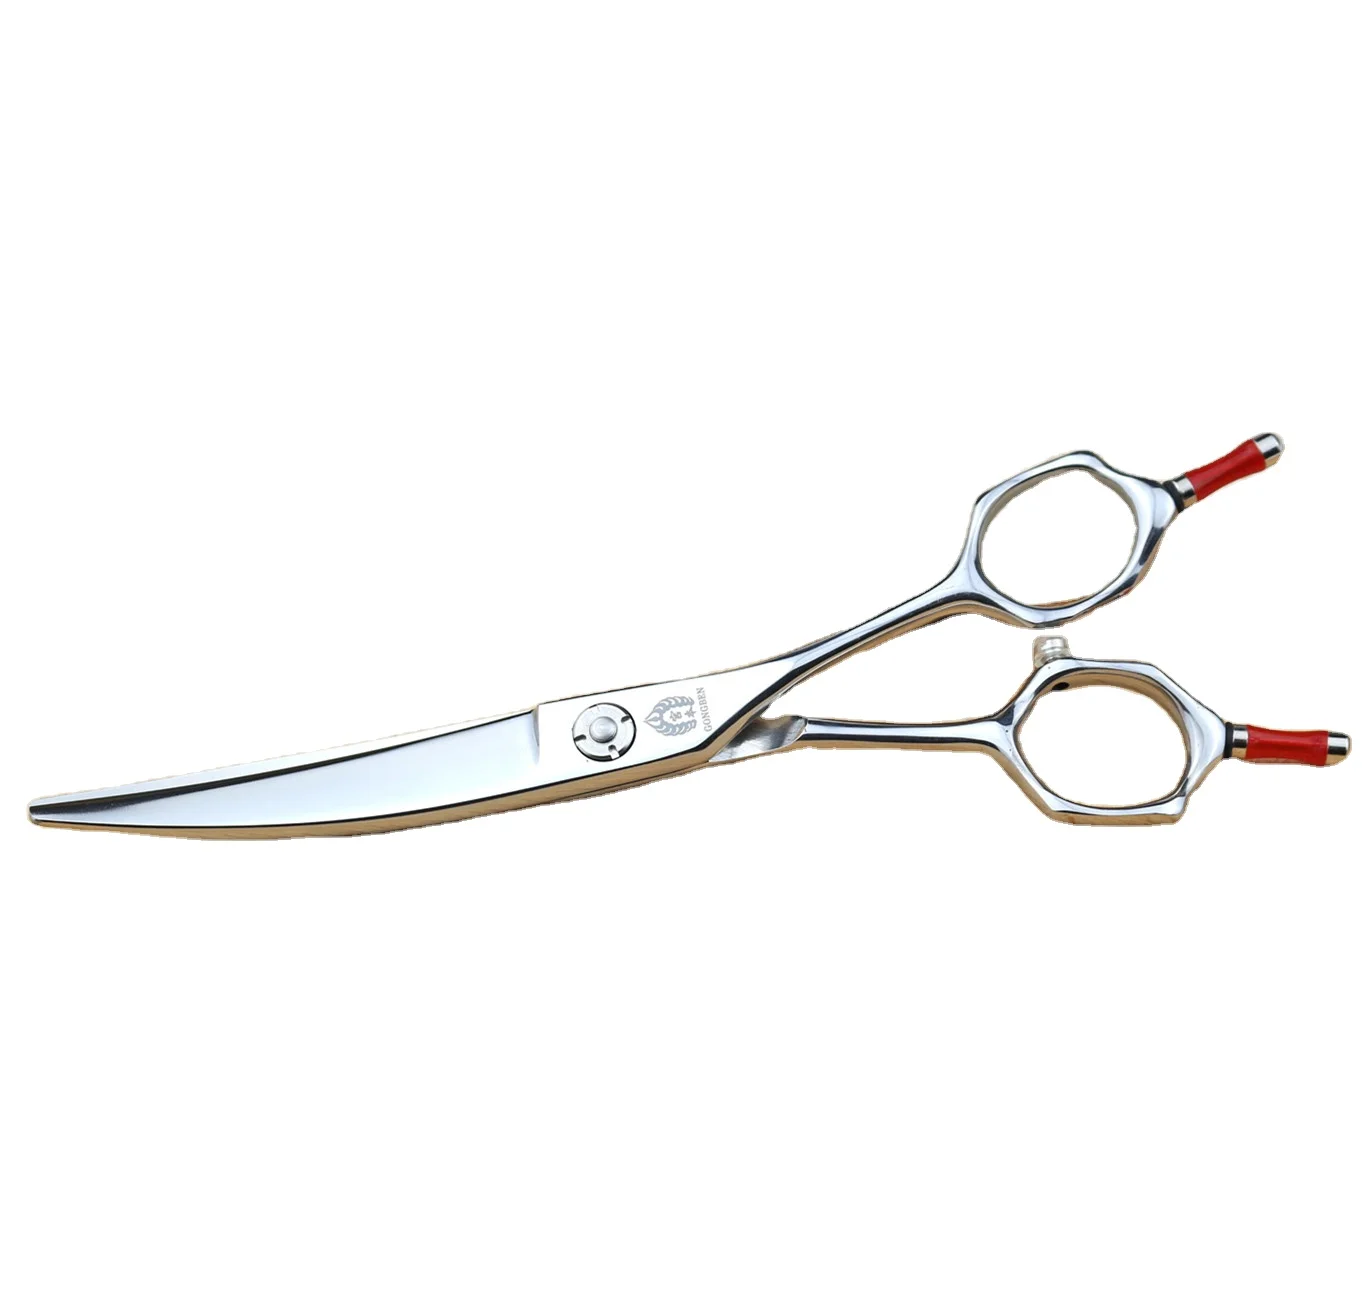 

Marigold multipurpose quality handmade utility unique Japan 440c hair curved sharp barber scissors, Silver or other color you wanted